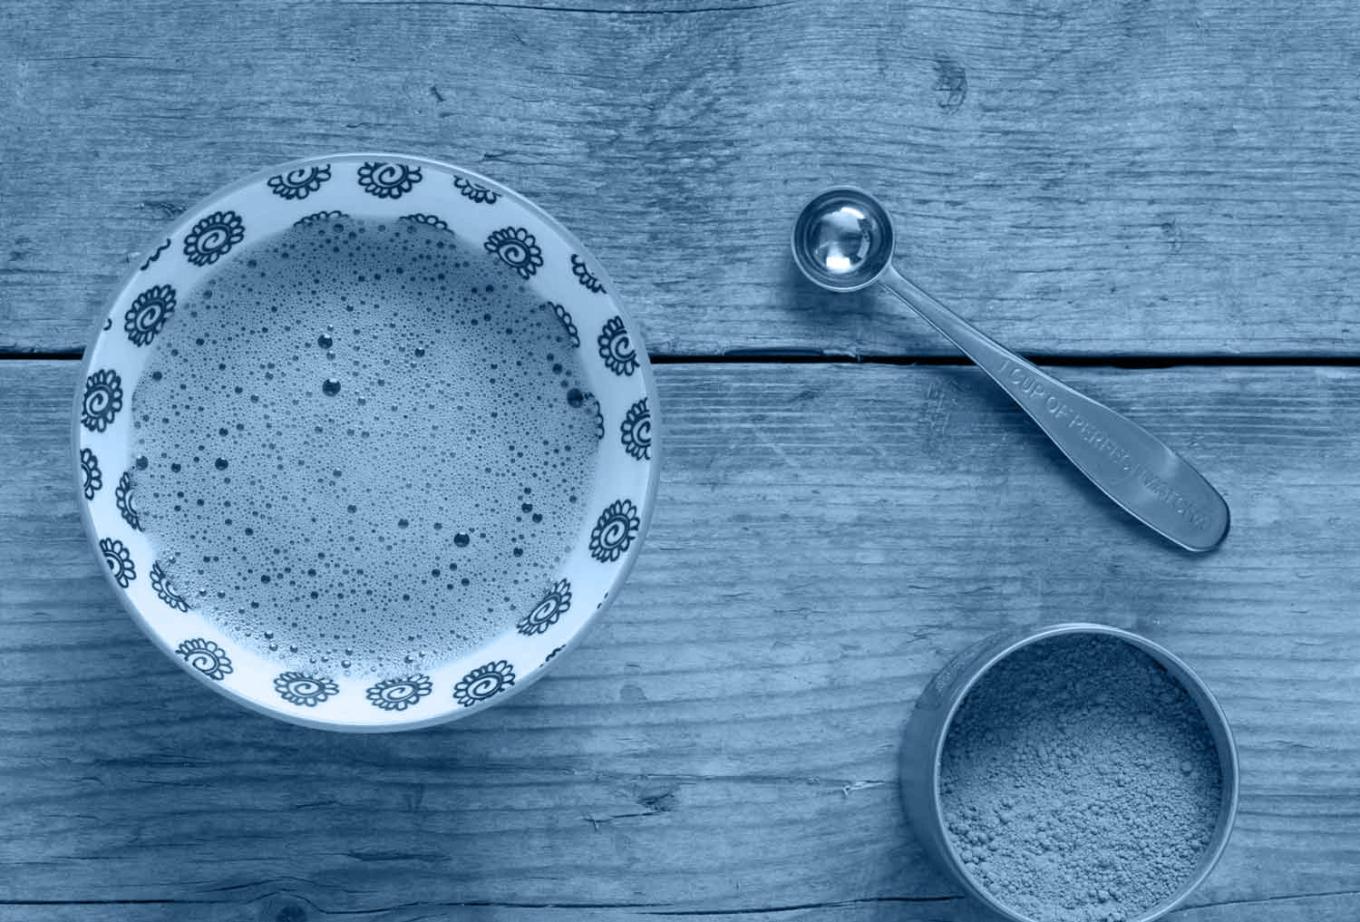 A cup of tea on a wooden table with a metal spoon next to it